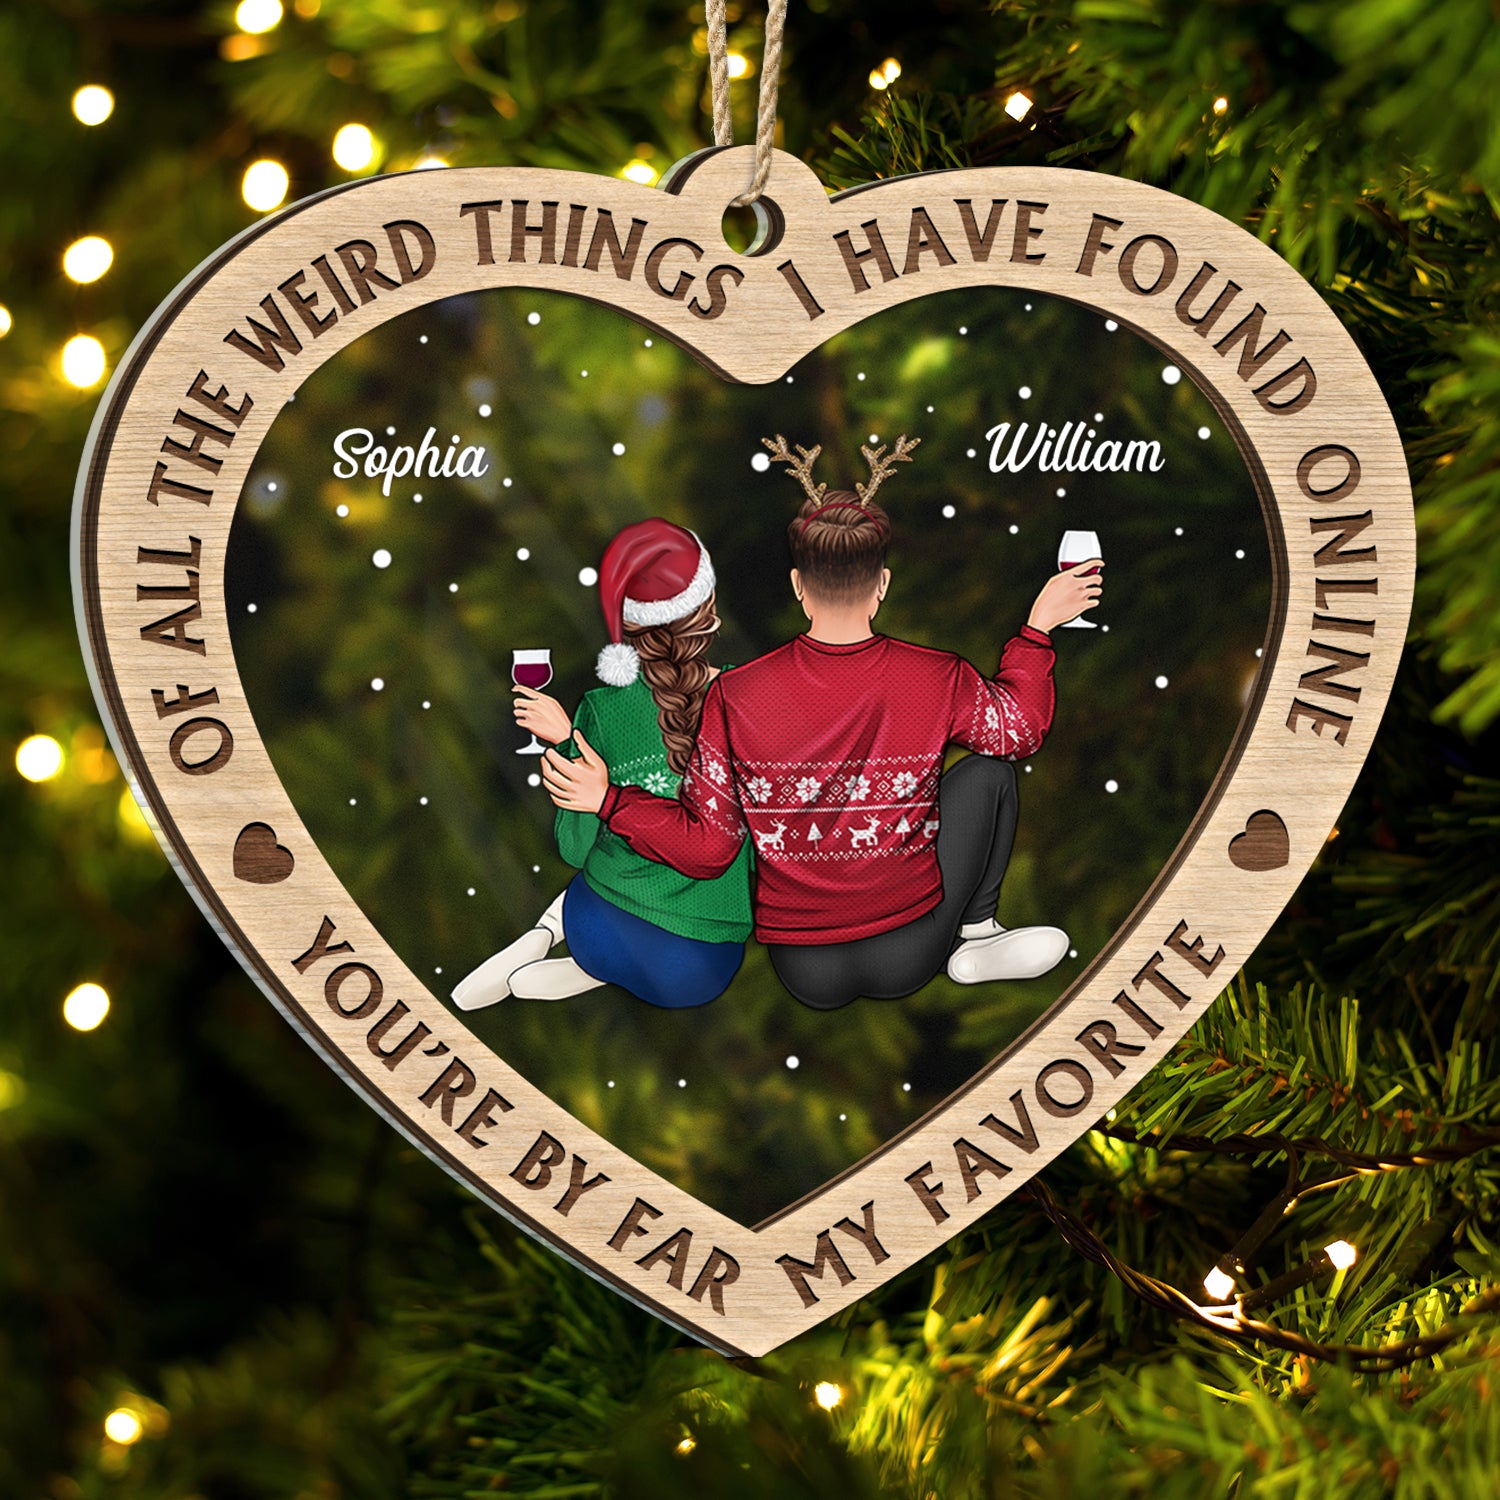 Of All The Weird Things - Christmas Gift For Couples, Husband, Wife - Personalized 2-Layered Mix Ornament